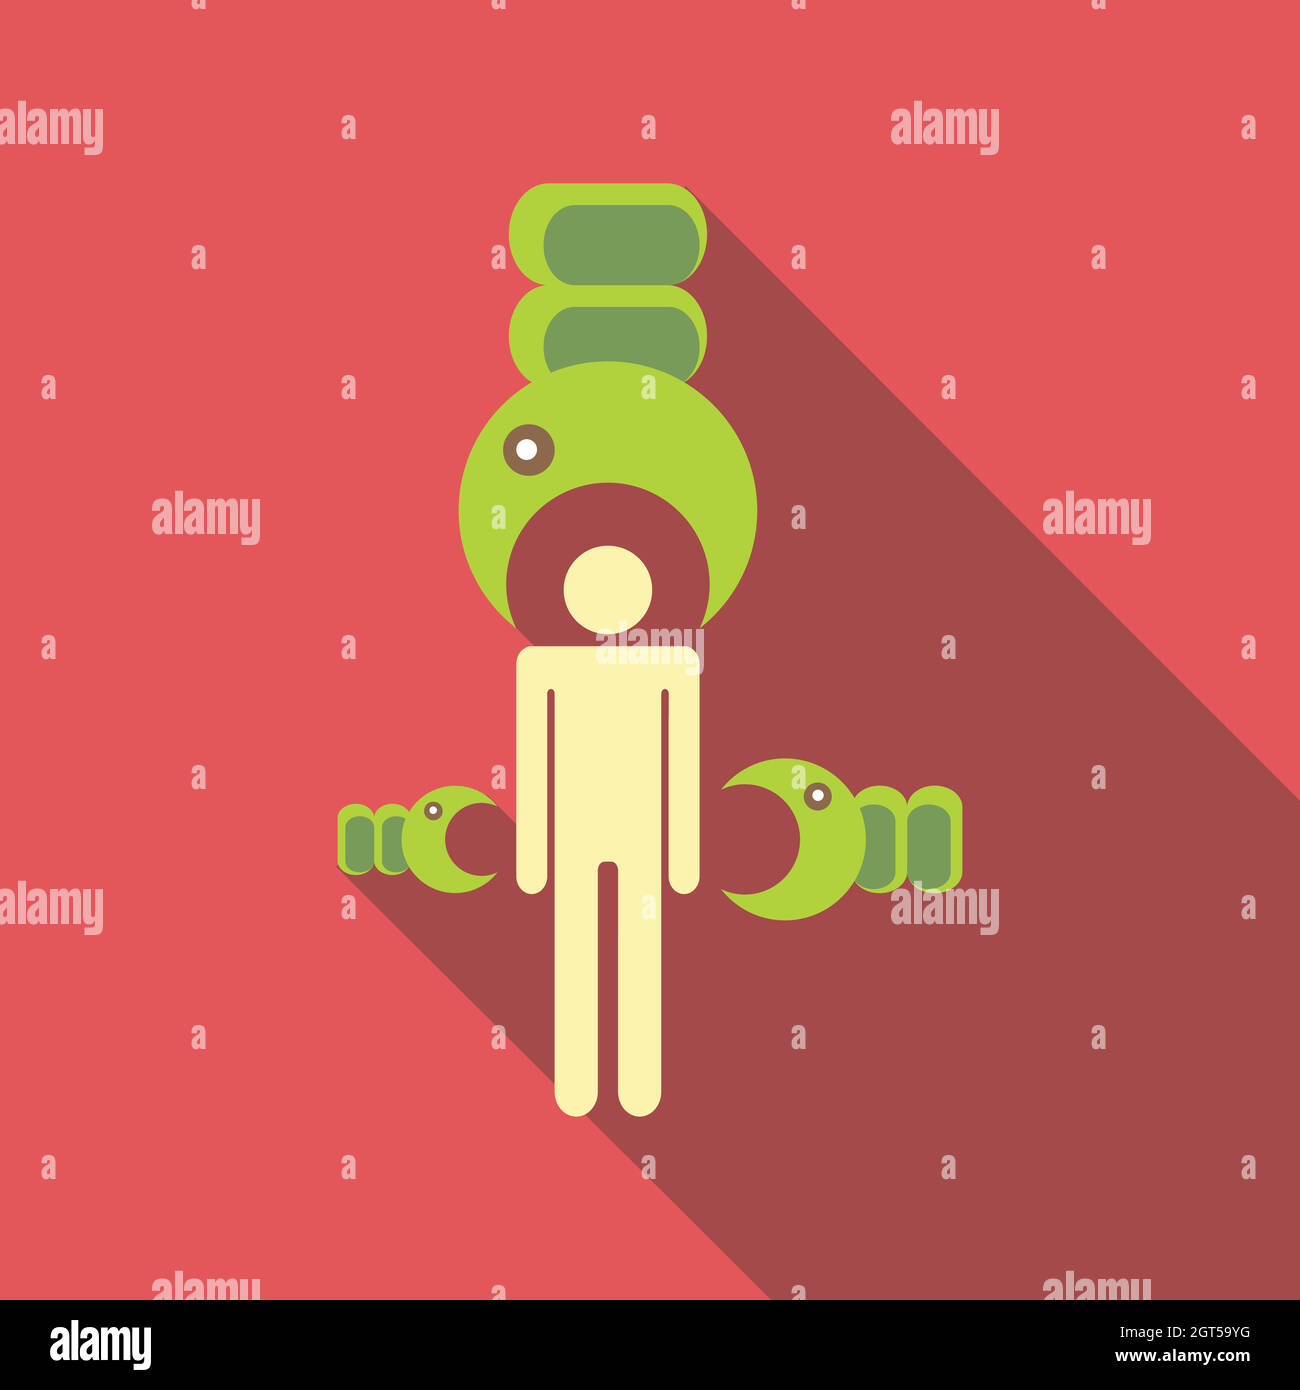 Man infographic template icon, flat style Stock Vector